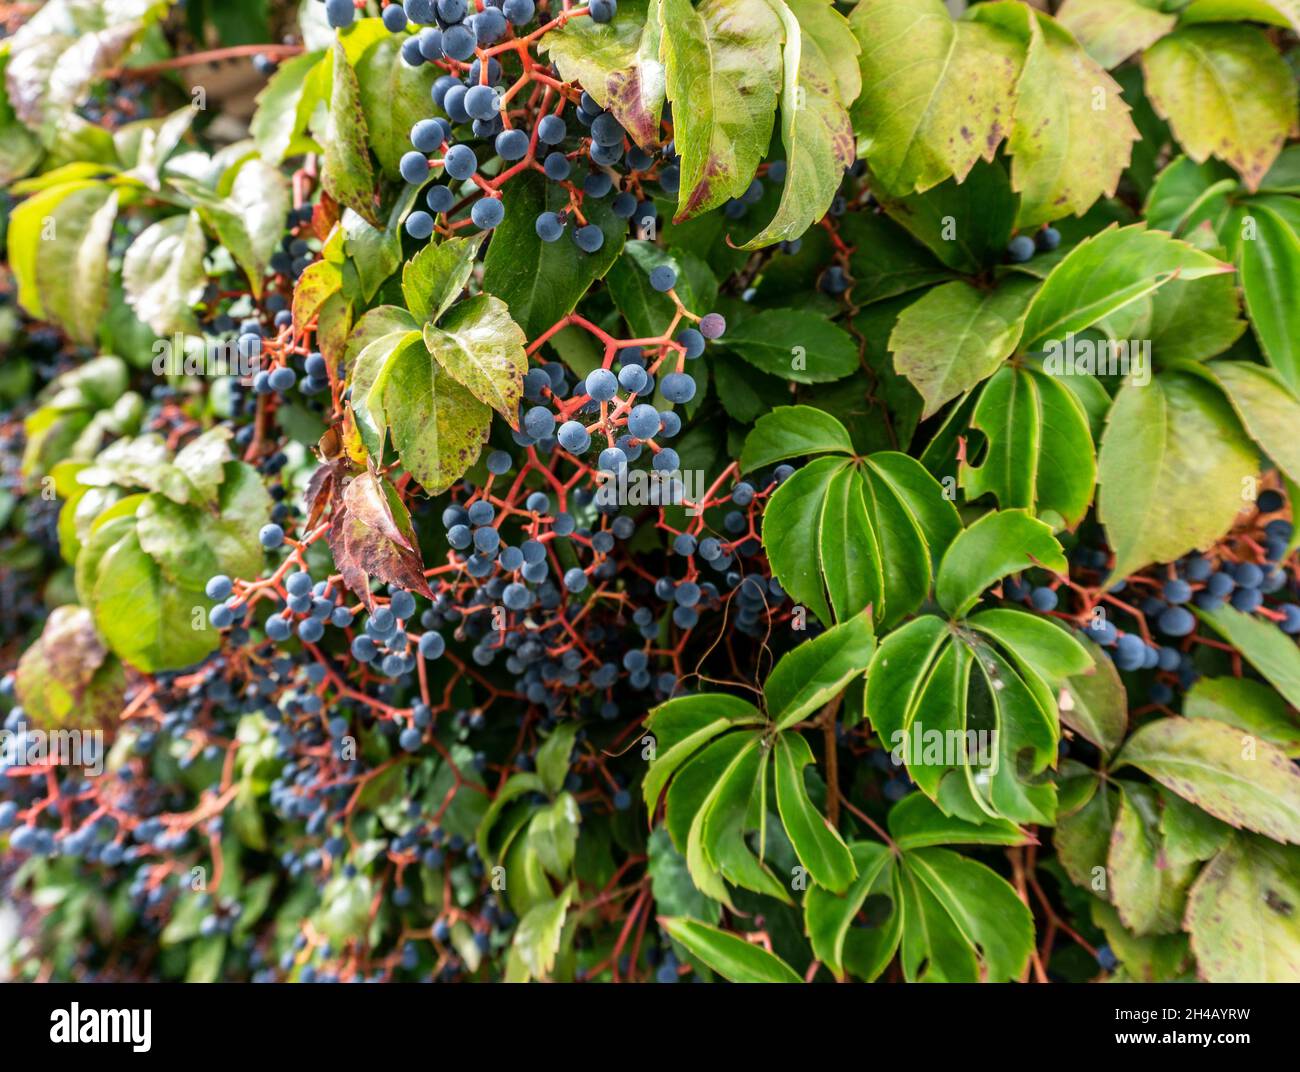 Virginia Creeper The Leaves And Bright Purple Berries Of Virginia Creeper Seen Here In Sicily 